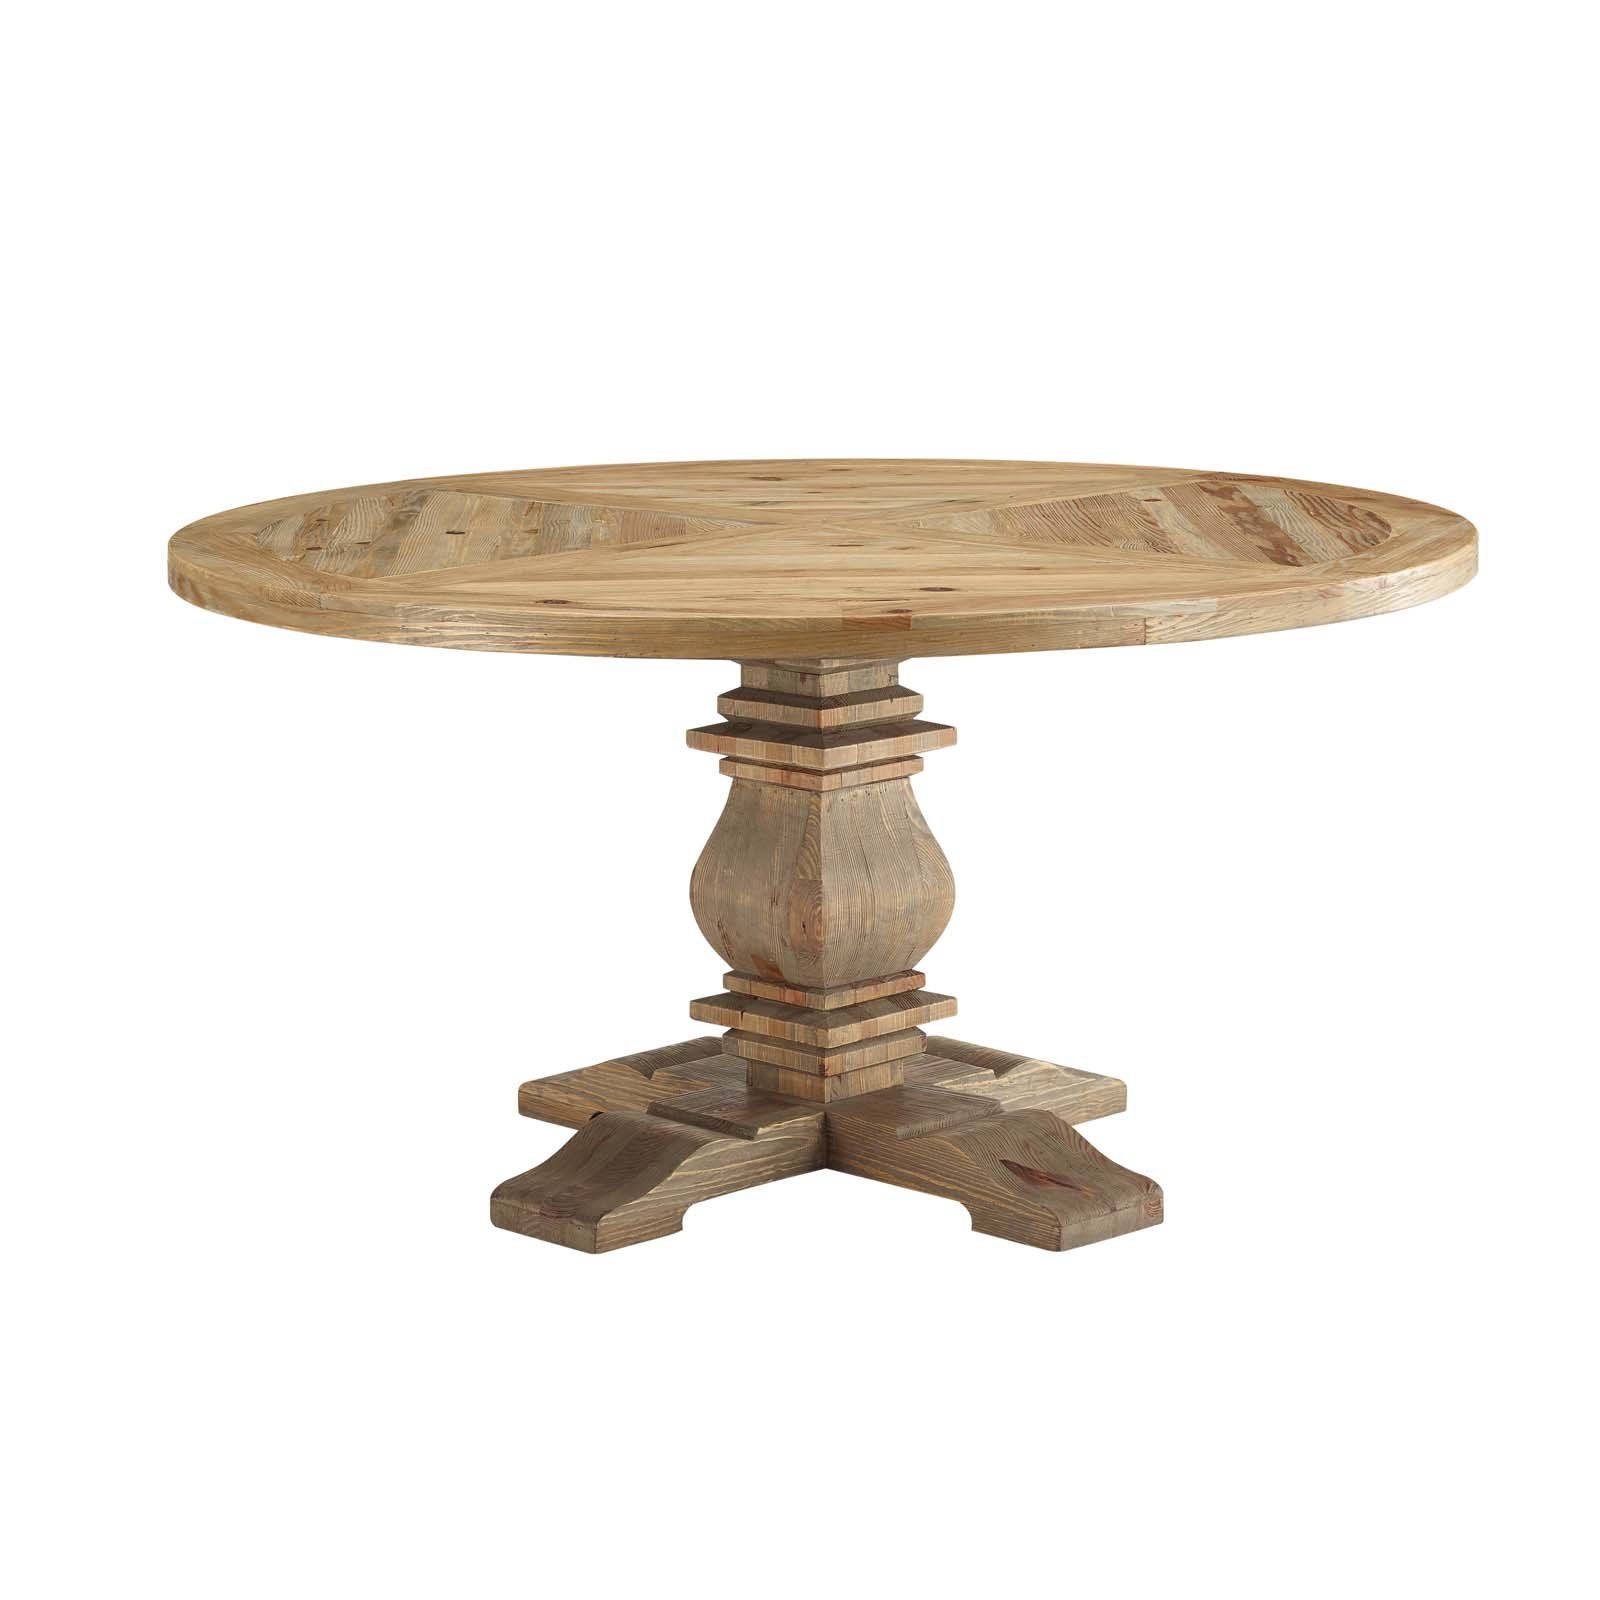 Column 59" Round Pine Wood Dining Table In 2019 | Products With Regard To Most Popular Montalvo Round Dining Tables (View 2 of 25)